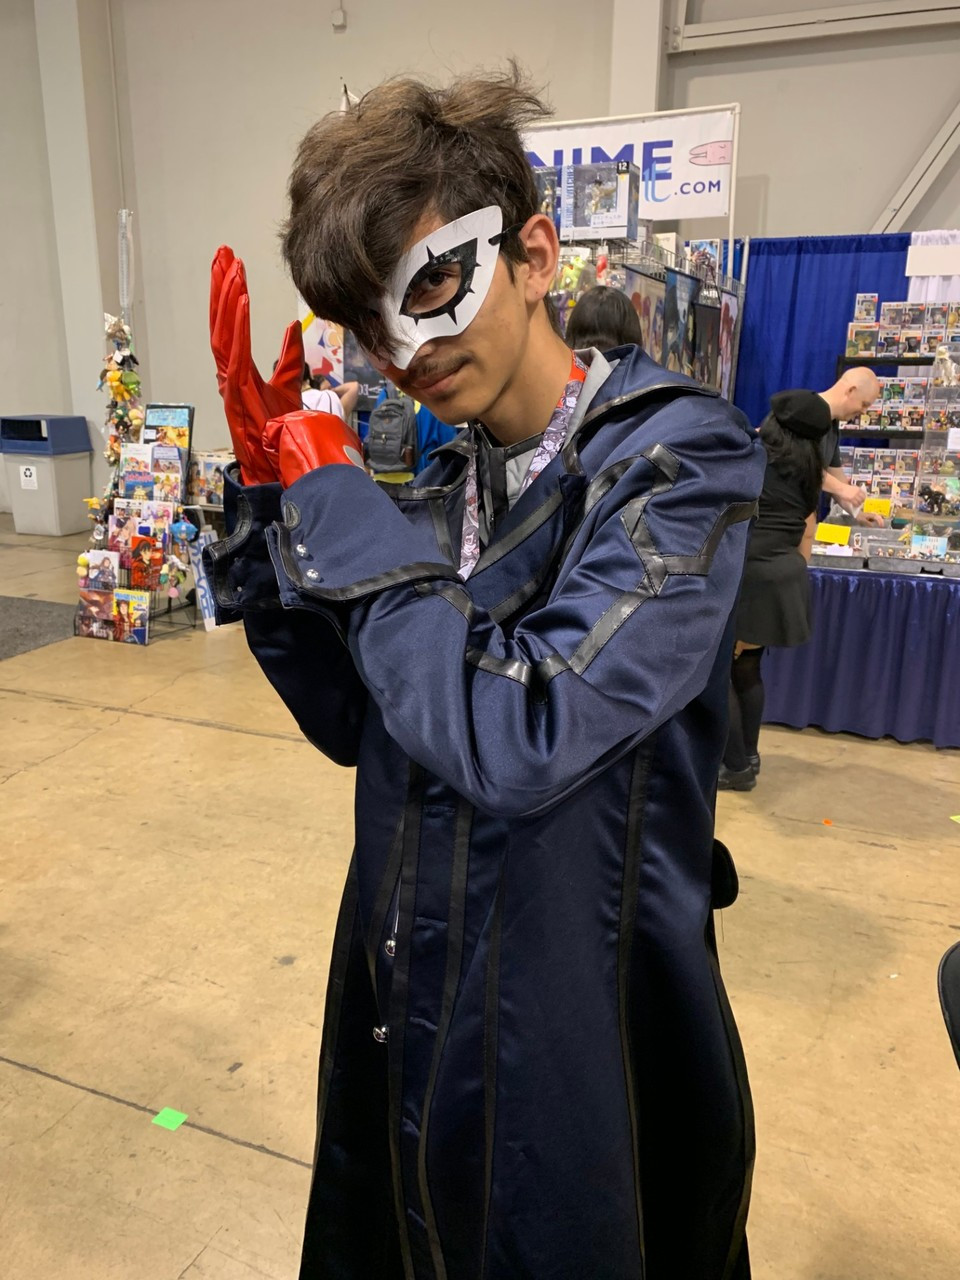 Joker From Persona 5 Costume, Carbon Costume